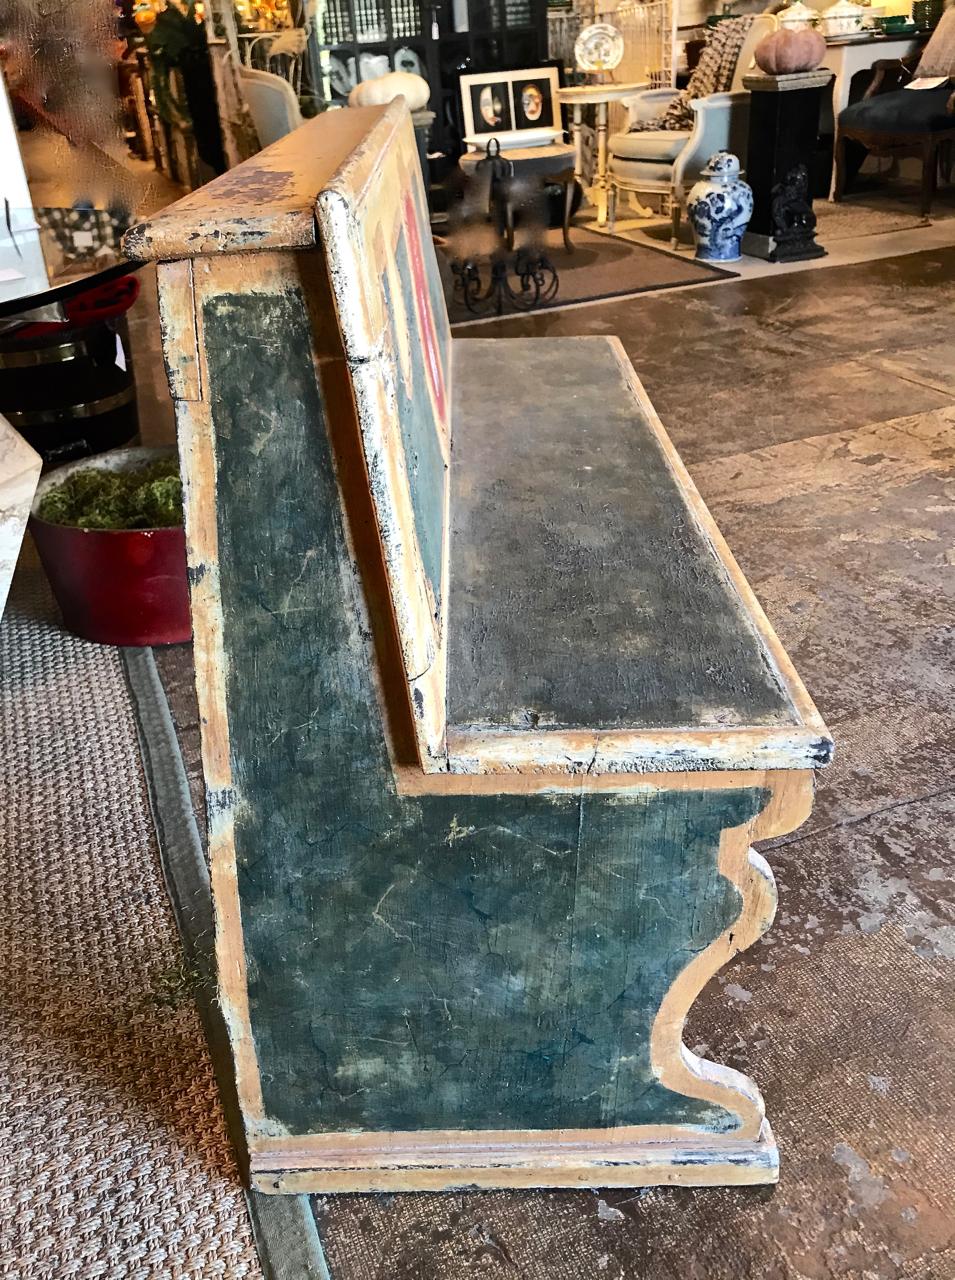 The is a great example of a late 18th century Tuscan pine bench that has been painted in faux marble typical of the period and bearing a coat of arms. The bench was hand planed, both square head and rose nails are present, both indicative of an 18th